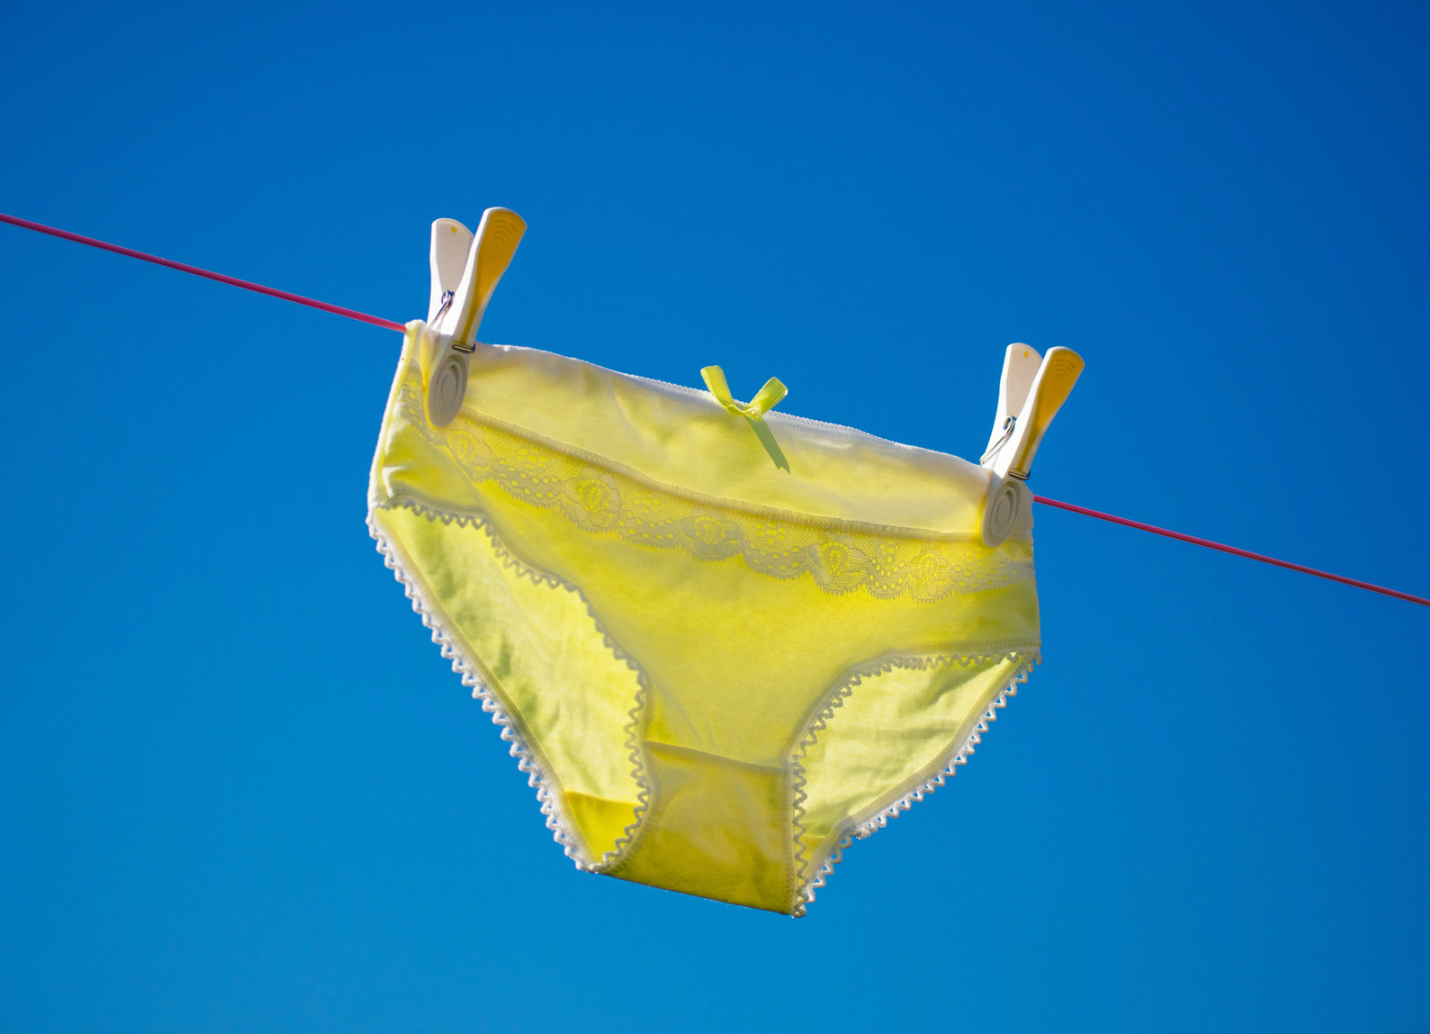 Why do my period underwear smell? - and how do I get rid of it